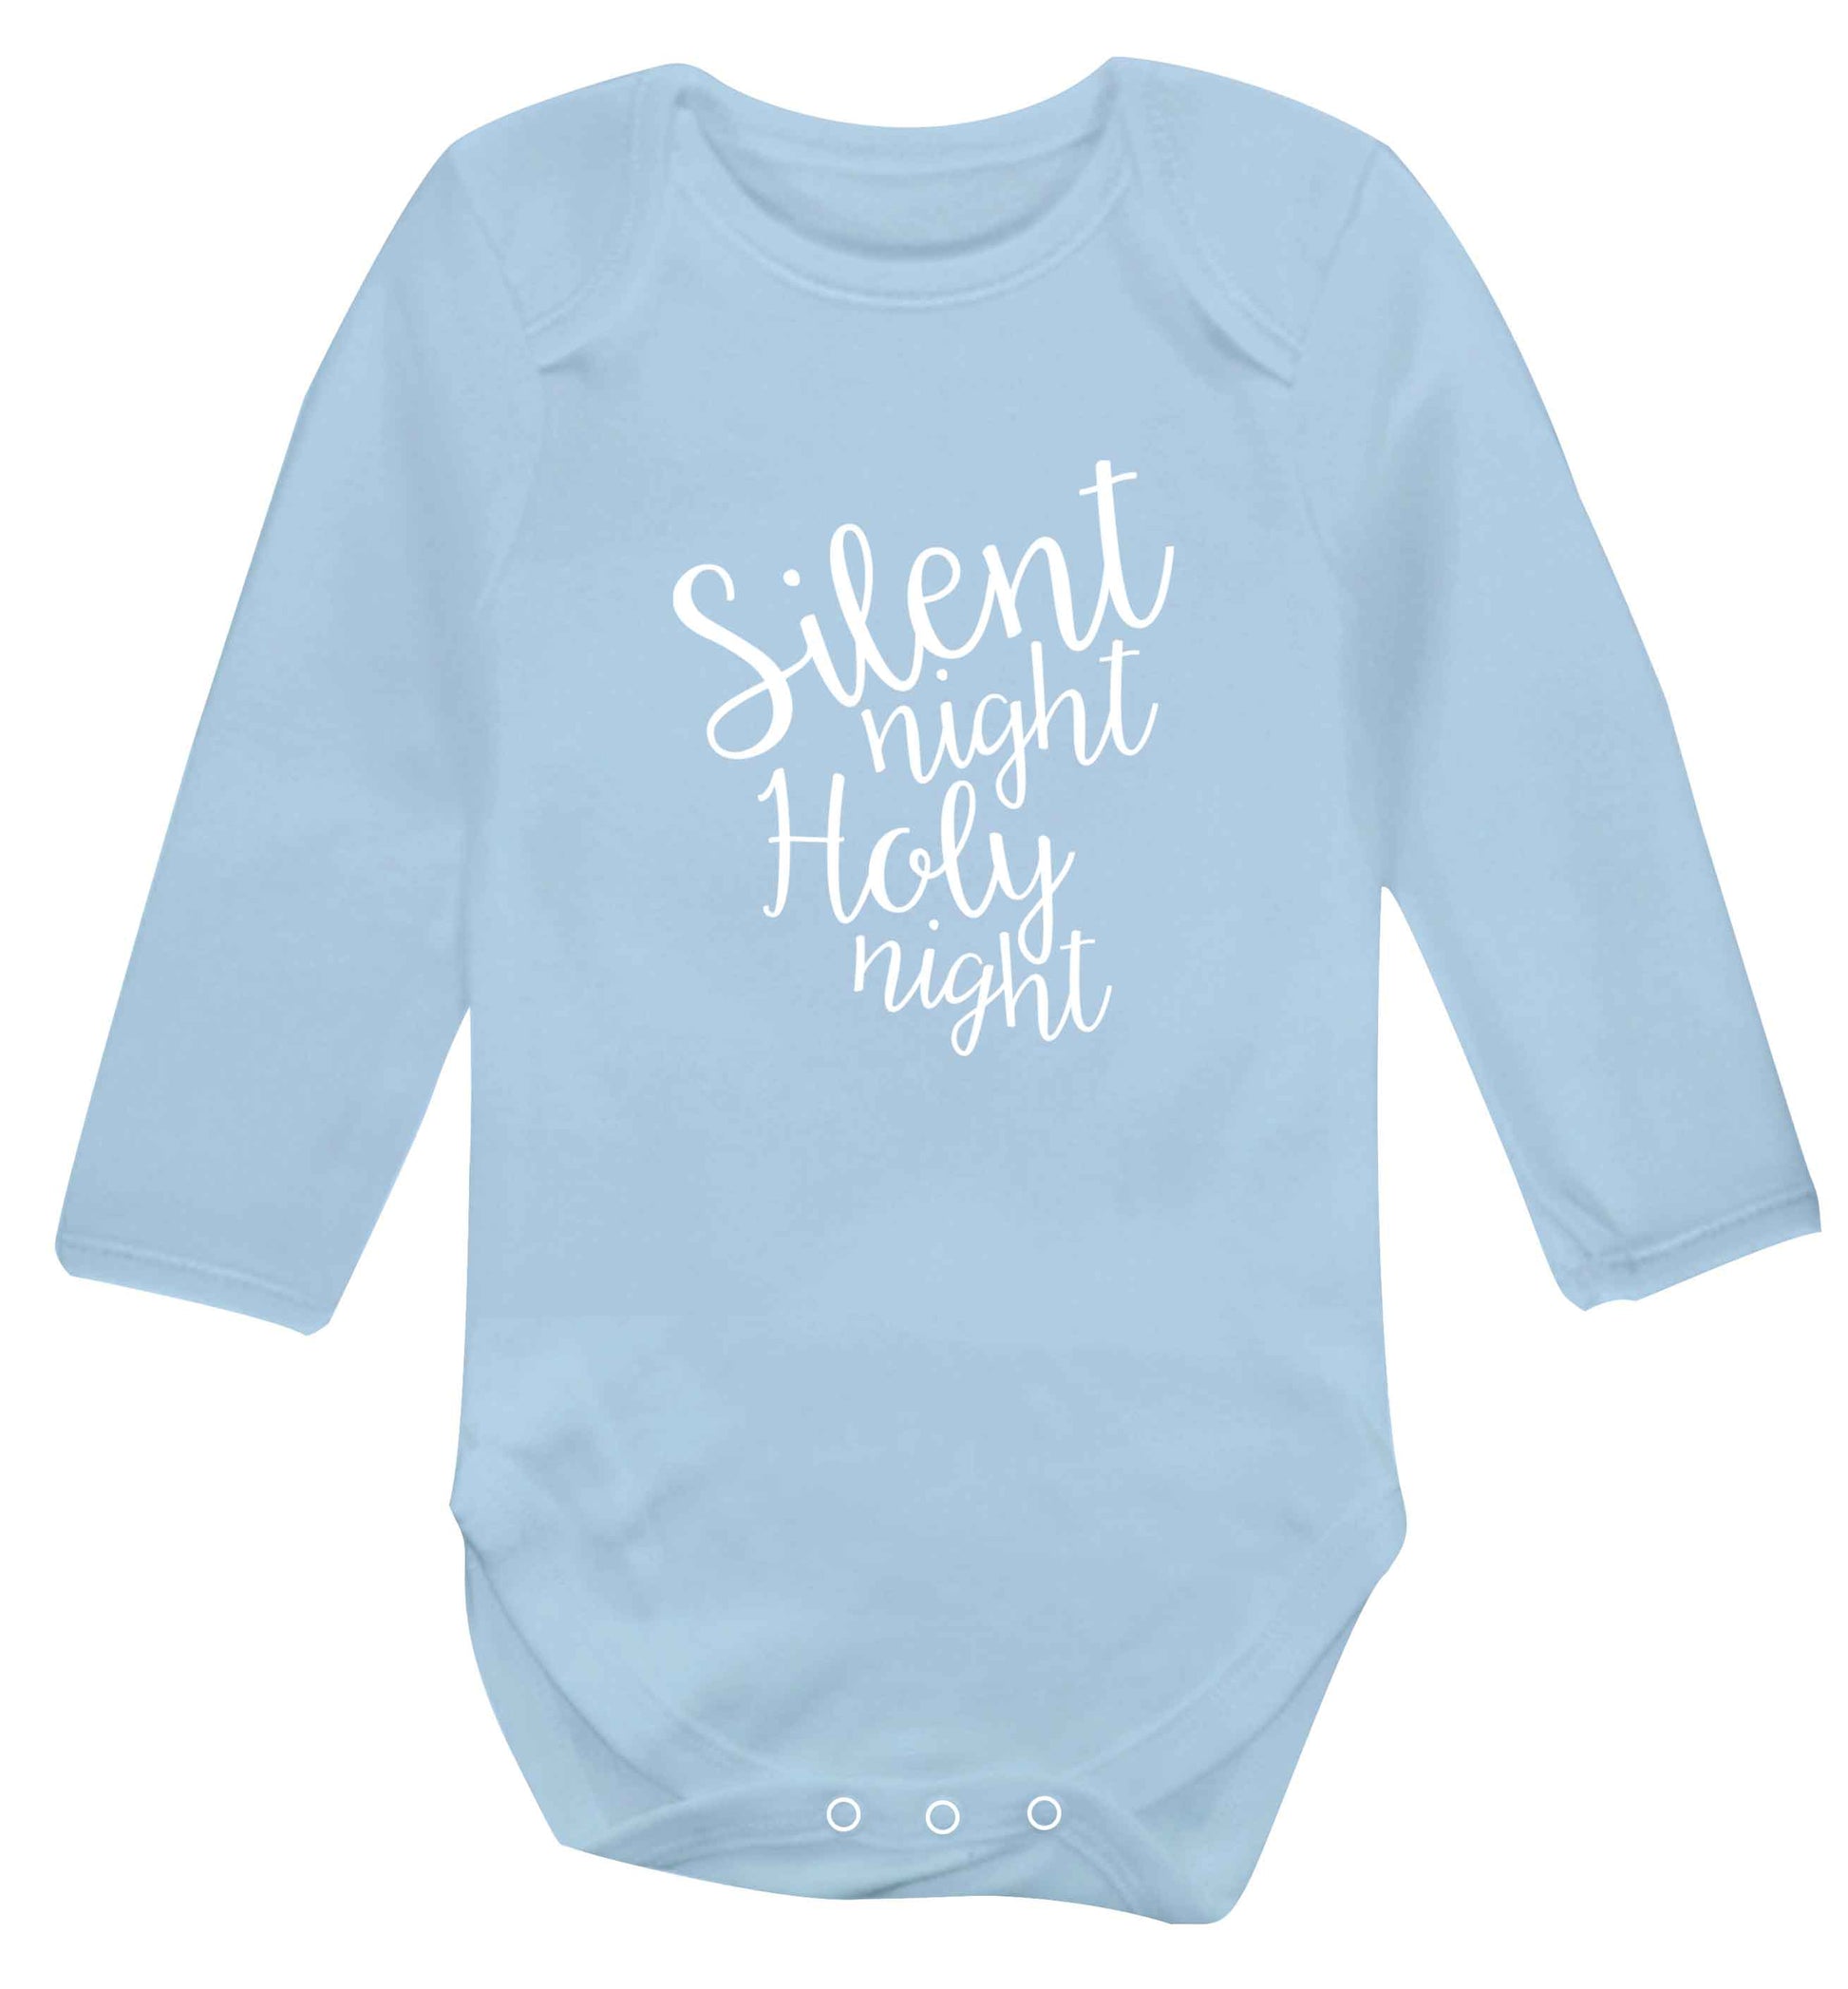 Silent night holy night baby vest long sleeved pale blue 6-12 months